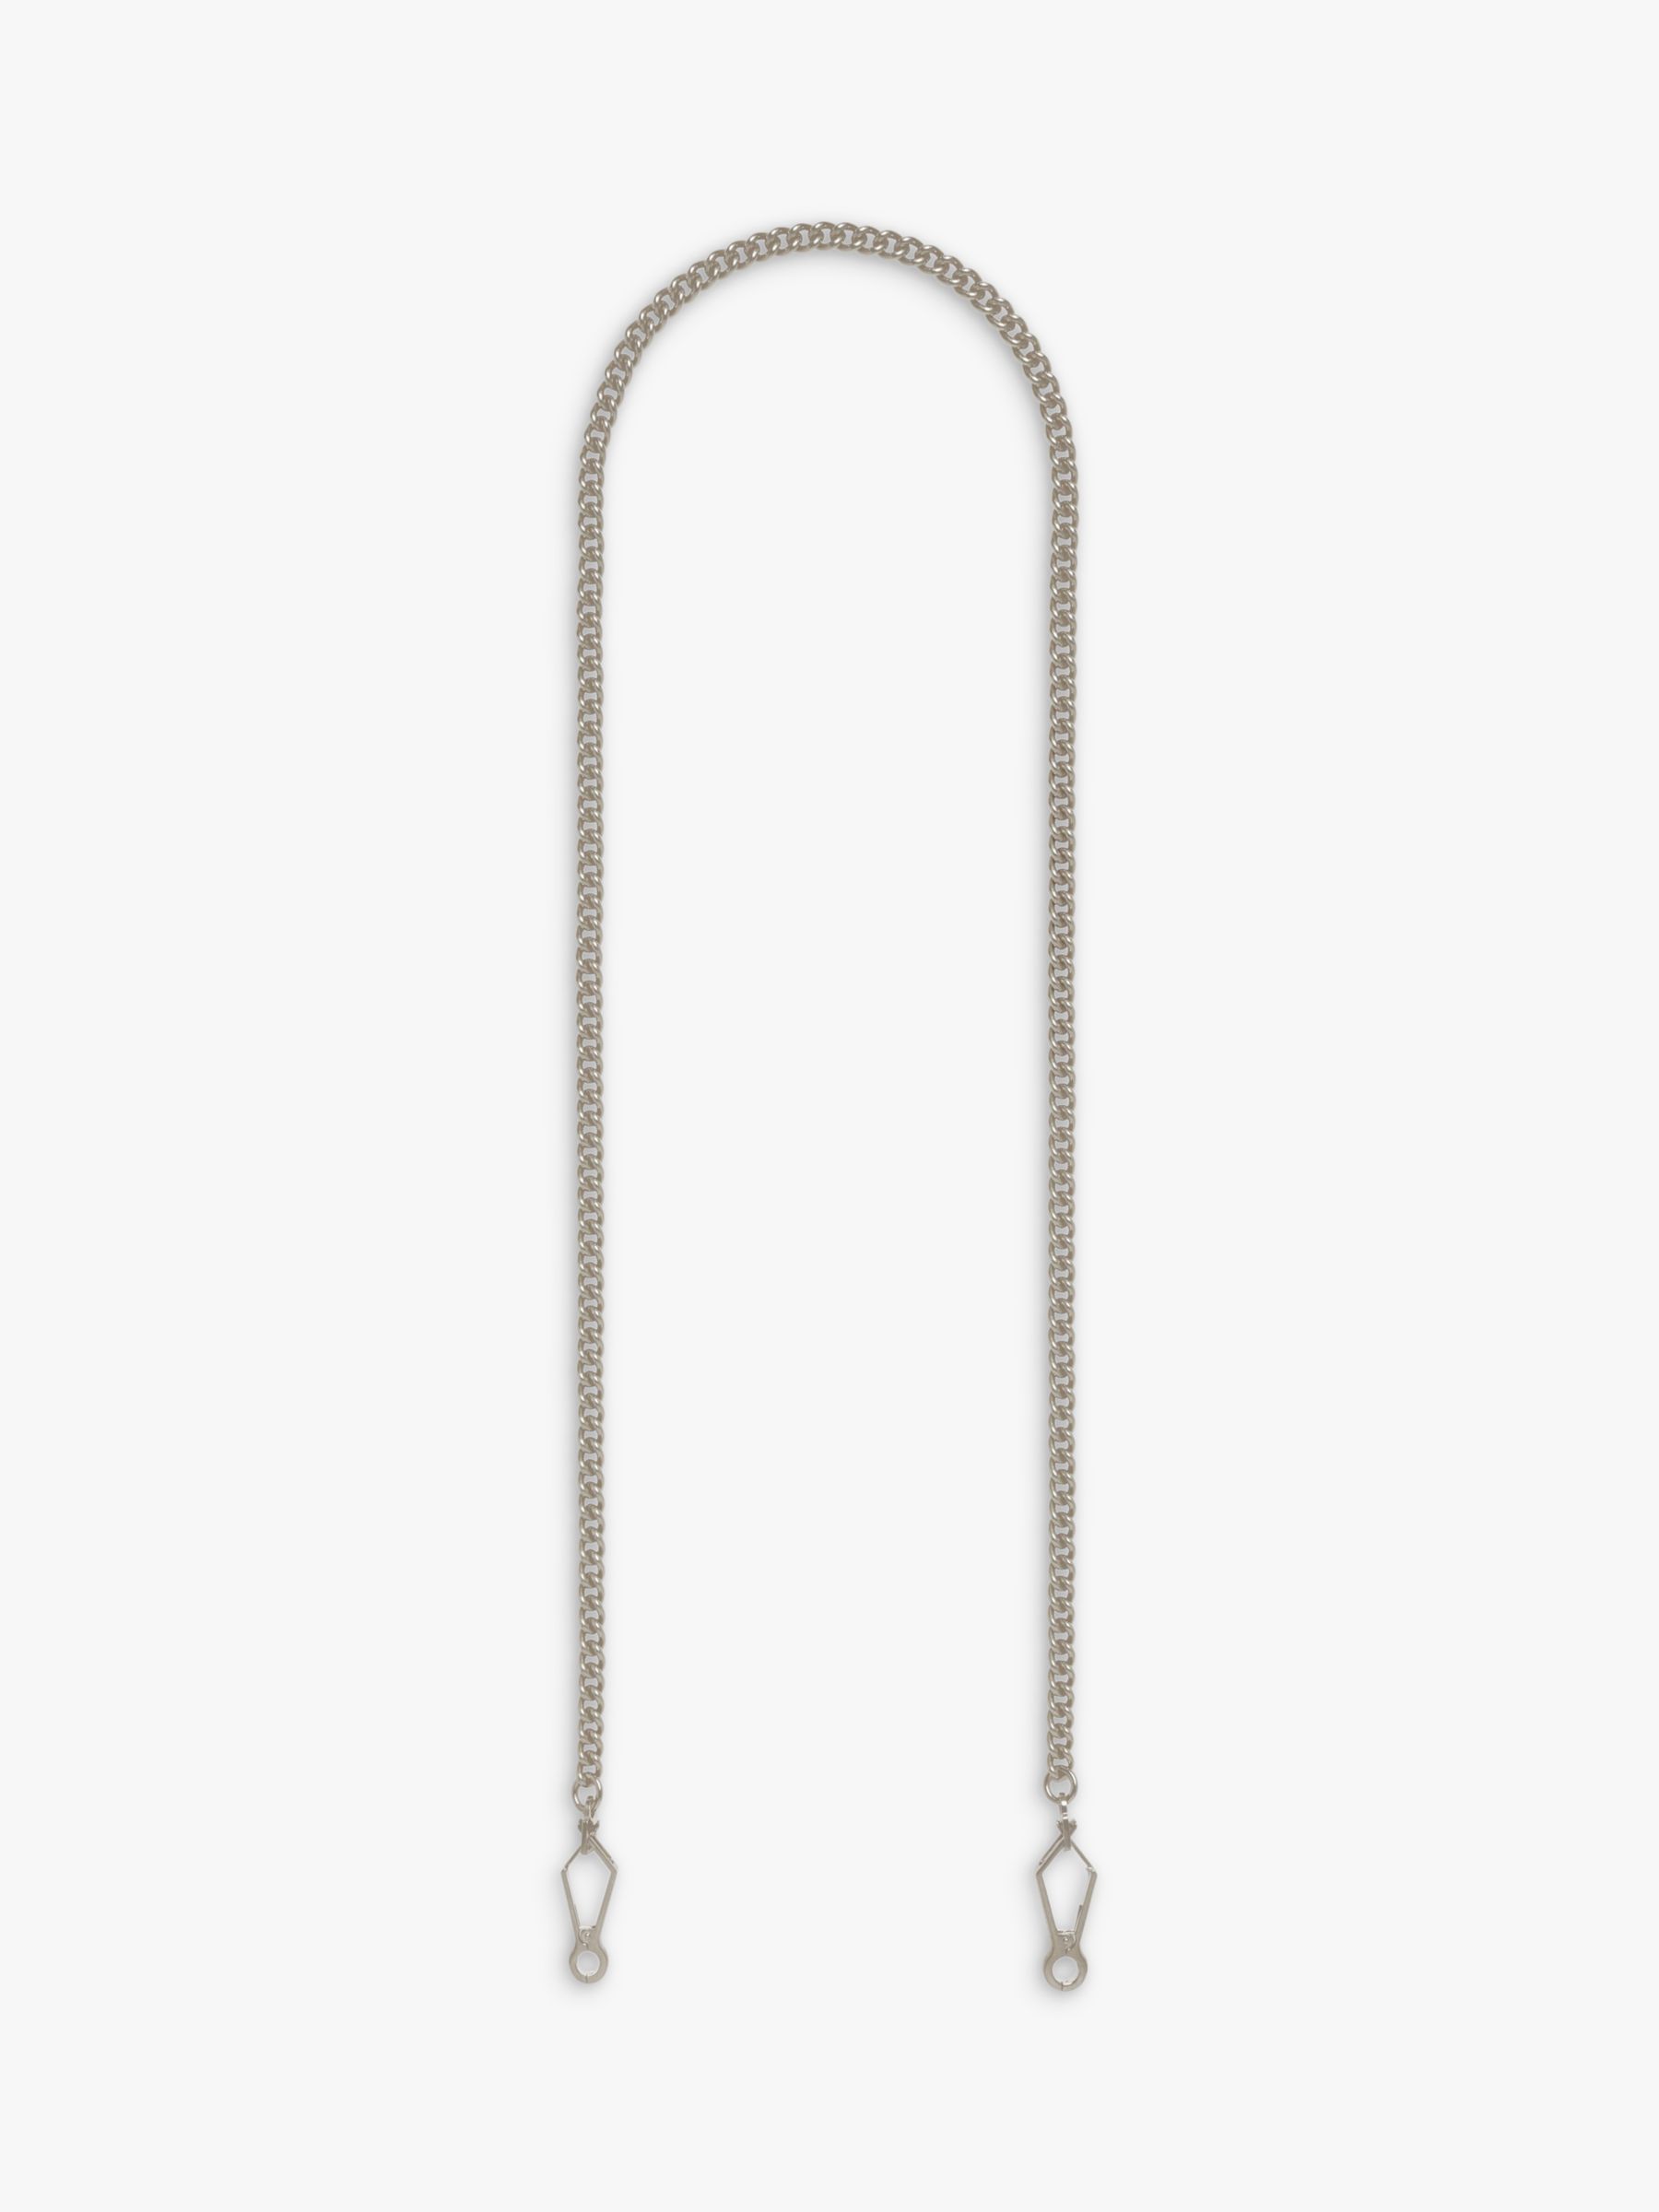 Mulberry Brass Chain Bag Strap, Silver